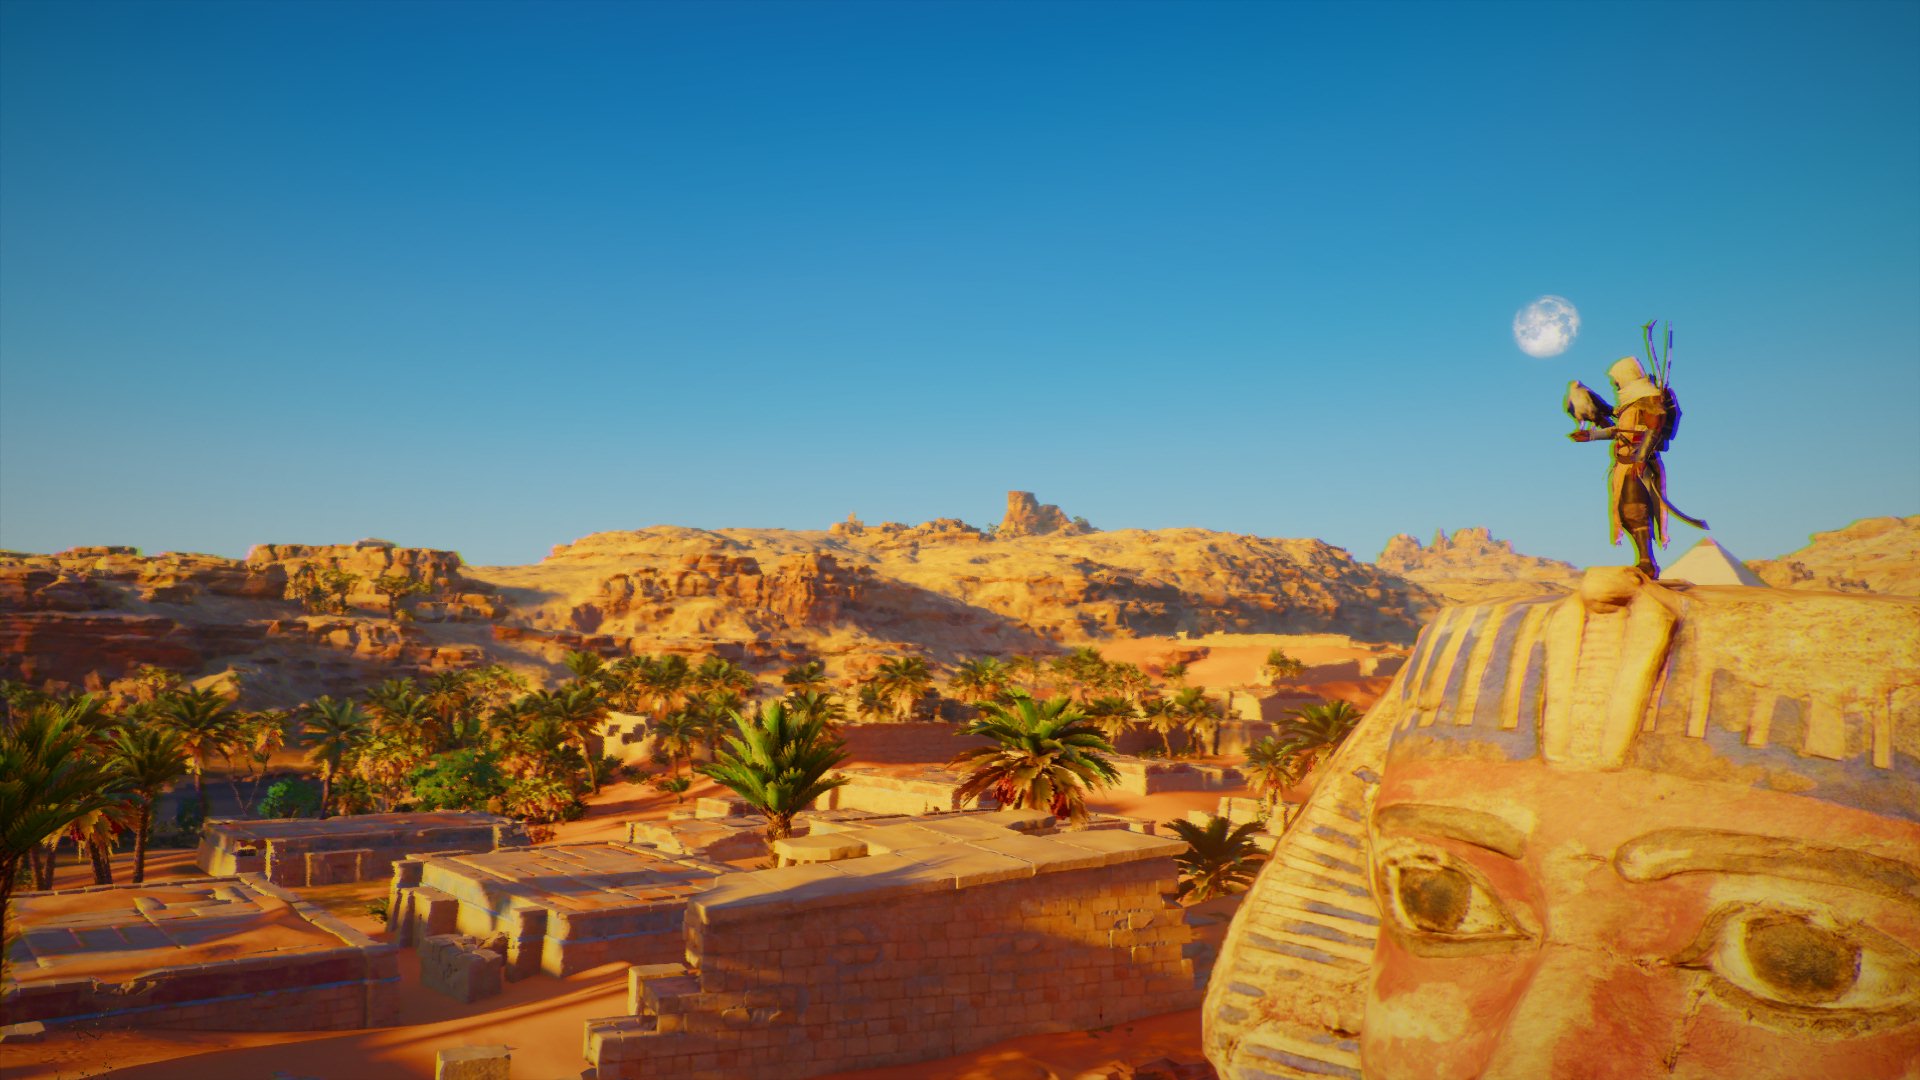 General 1920x1080 Assassin's Creed Assassin's Creed: Origins screen shot video games Ubisoft video game landscape PC gaming